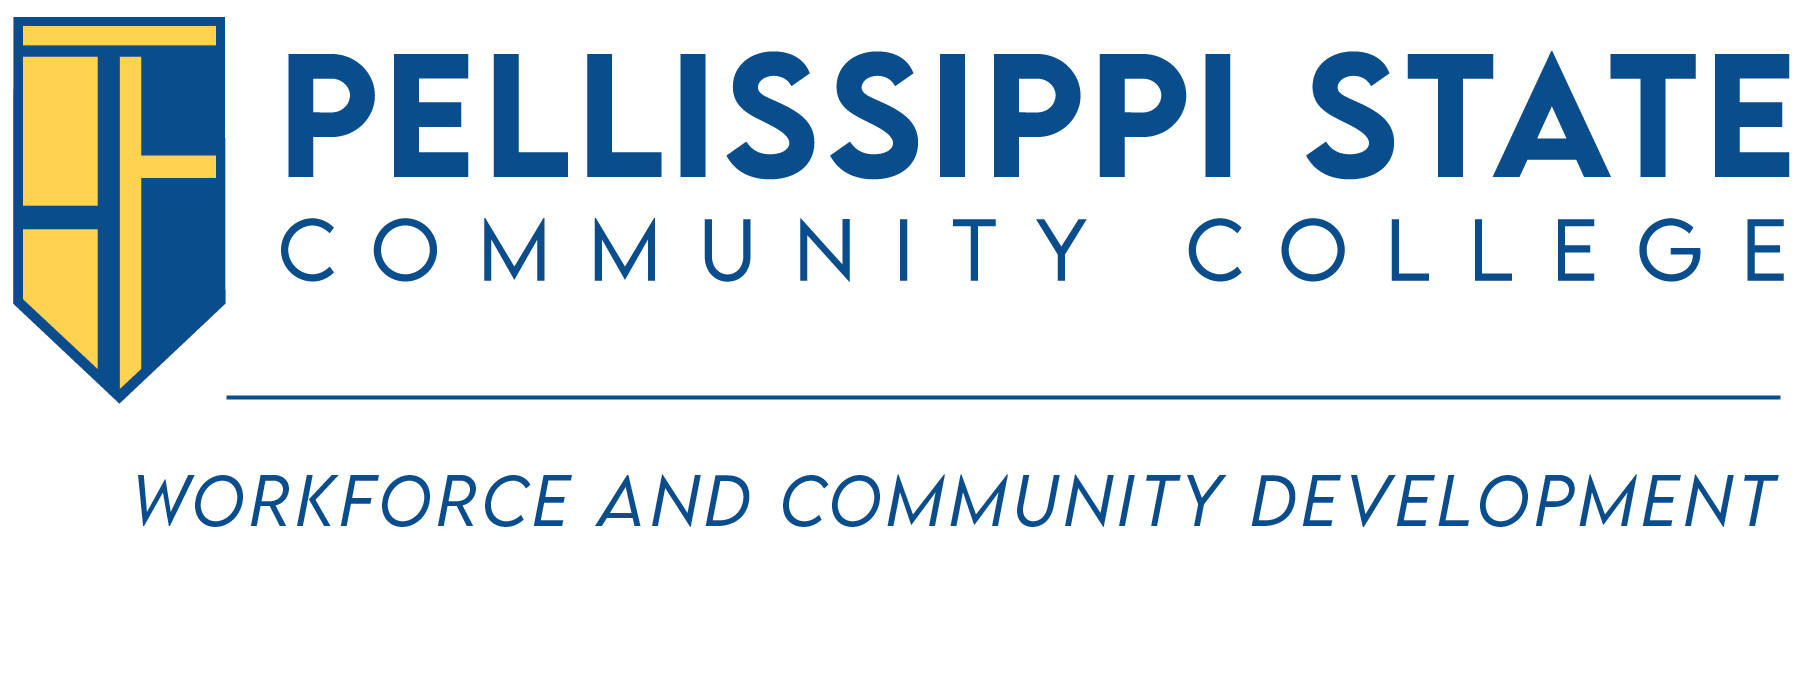 Pellissippi State Community College - Learning Resources Network